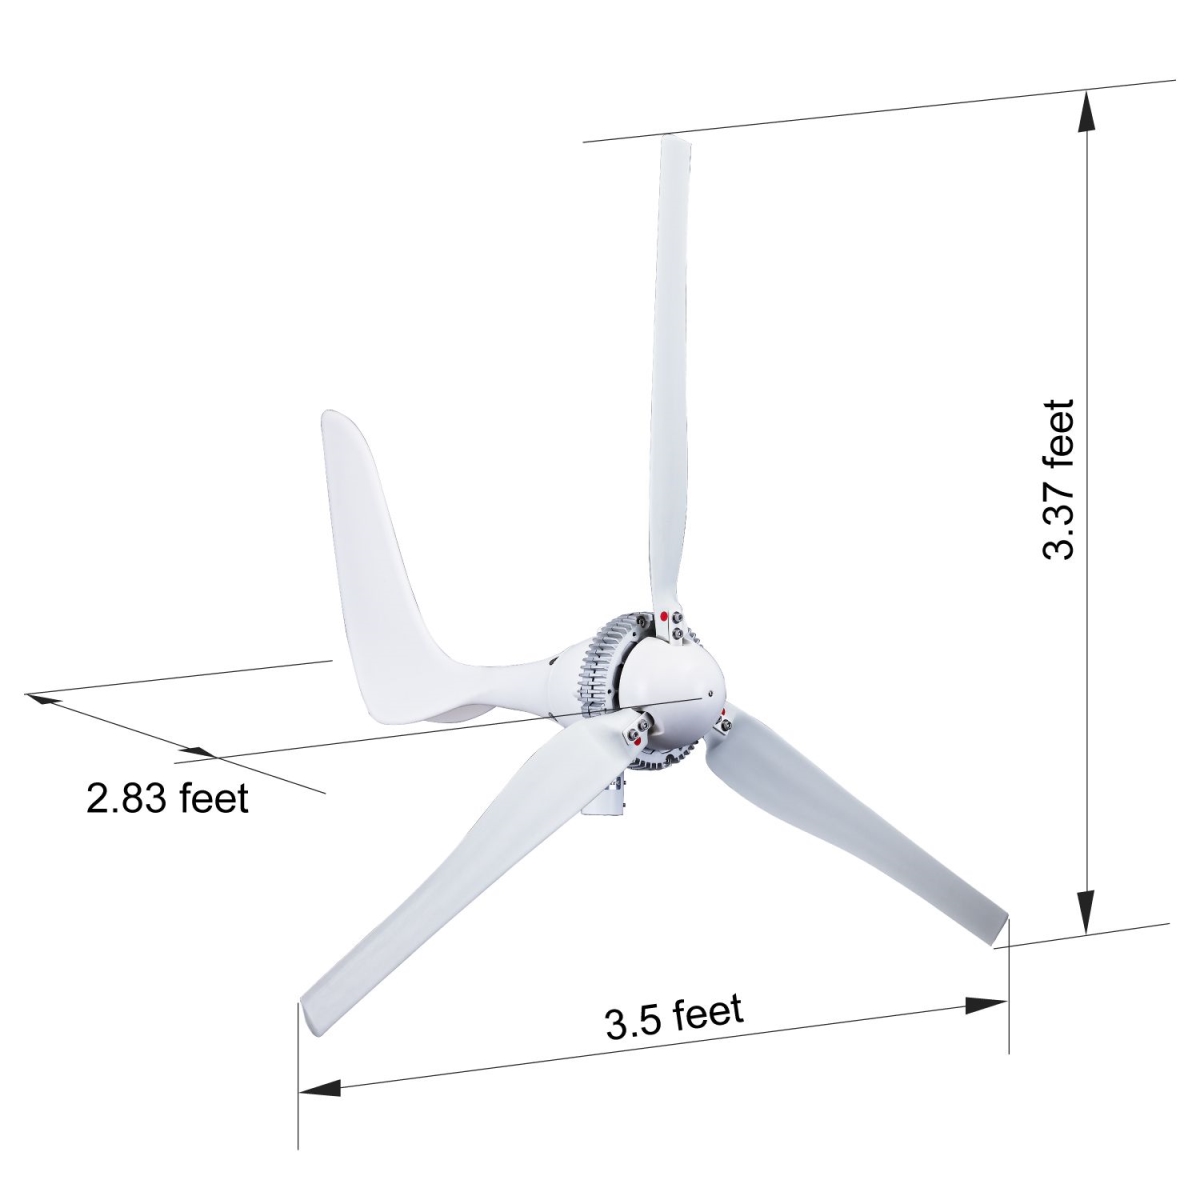 Picture of Automaxx Windmill UB1500S148 1500W 48V 60A Wind Turbine Generator kit with Bluetooth Controll  Additional Spare Blade Set.